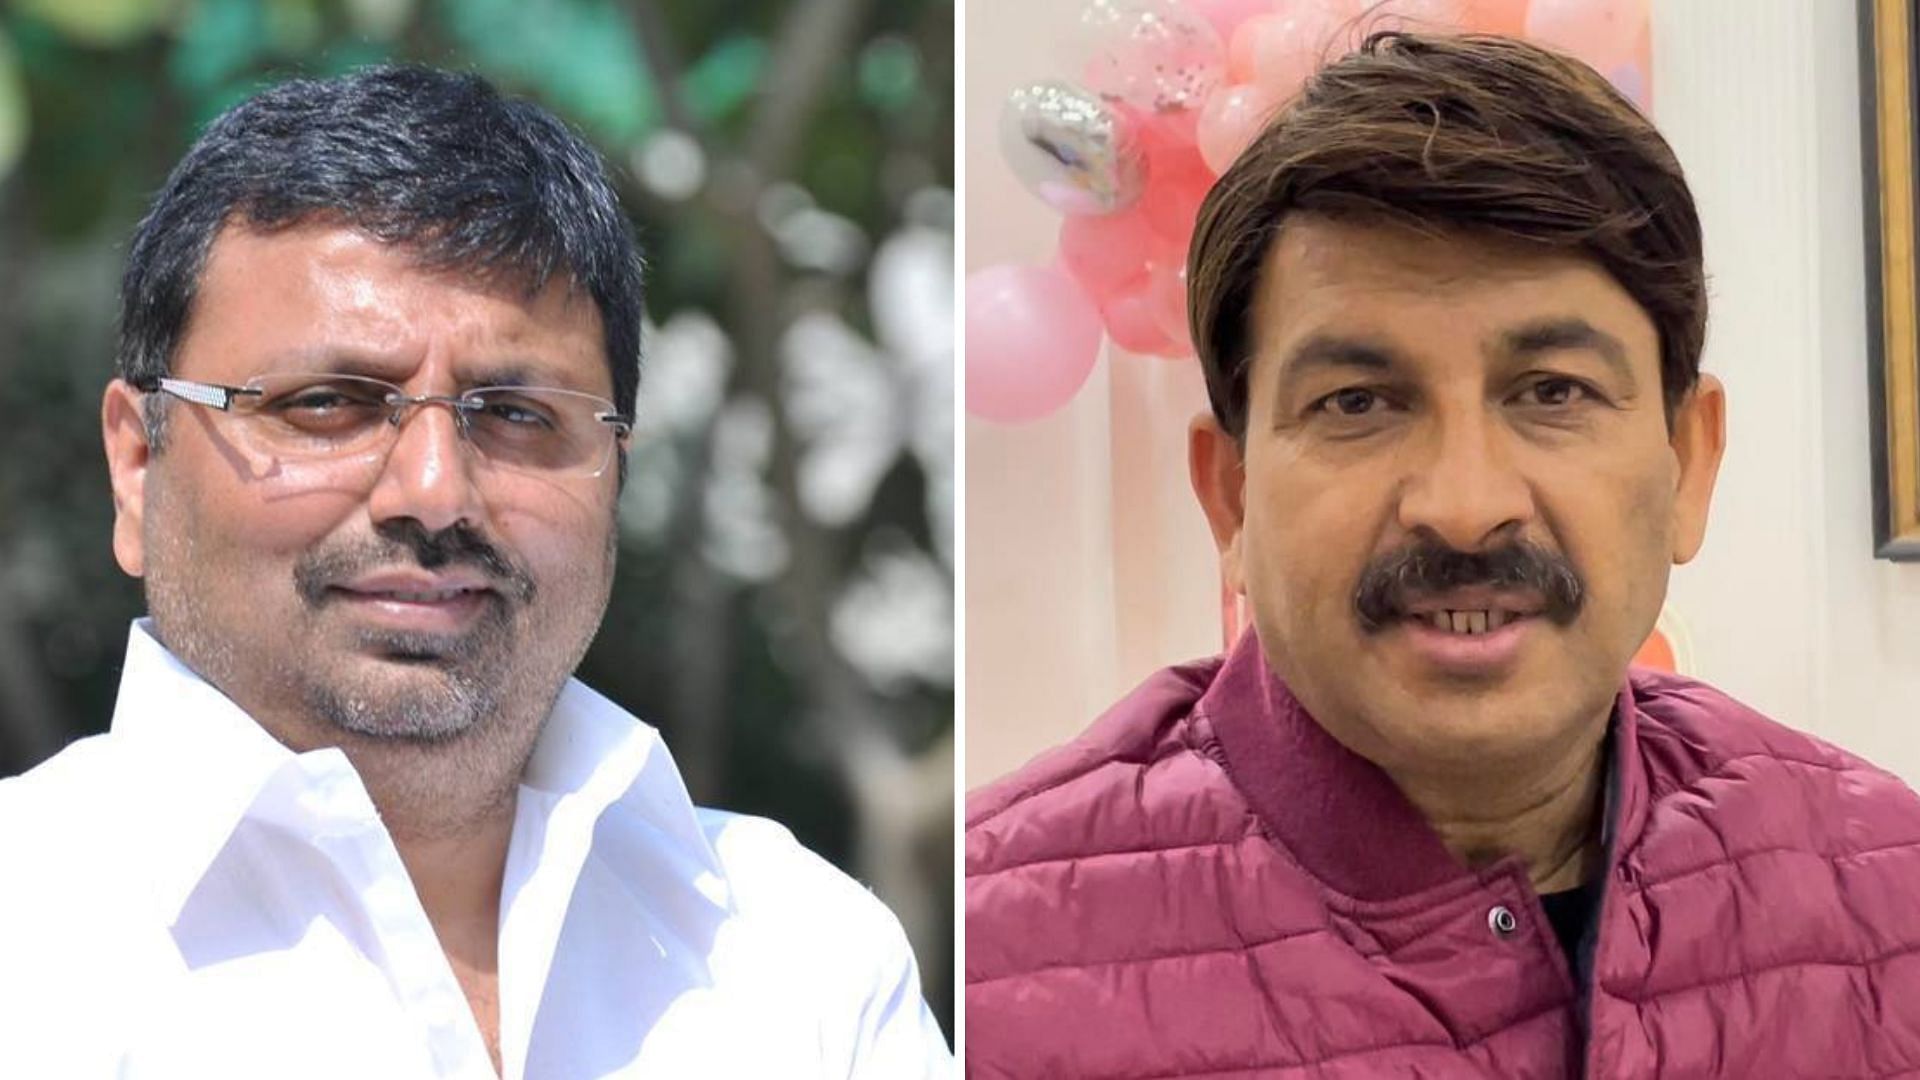 <div class="paragraphs"><p><a href="https://www.thequint.com/topic/bharatiya-janata-party">BJP</a> MP Nishikant Dubey, his two sons, and party MP Manoj Tiwari were booked by the Jharkhand Police on Thursday, 1 September, for allegedly taking clearance from the Air Traffic Control (ATC) for take-off from Deoghar airport on 31 August in a forceful manner, even as there is no night take-off or landing facility at the airport.</p></div>